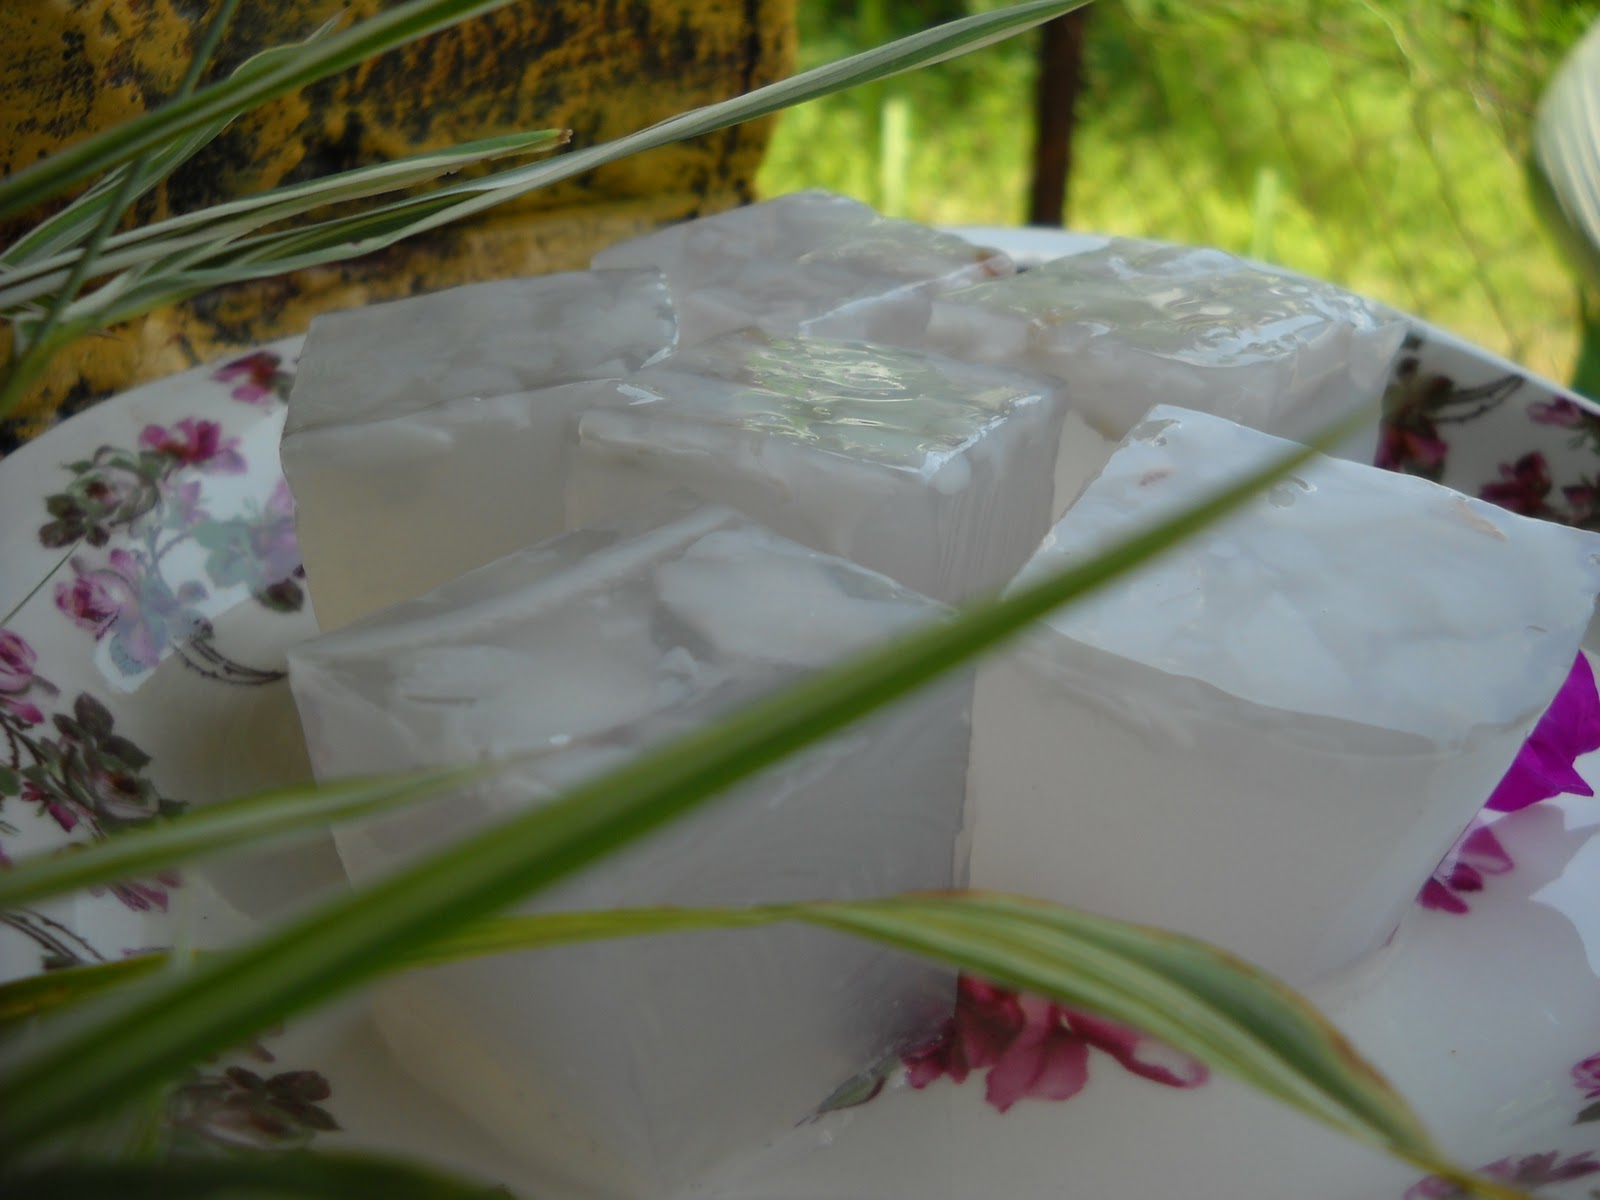 Cooking with soul: KELAPA JELLY